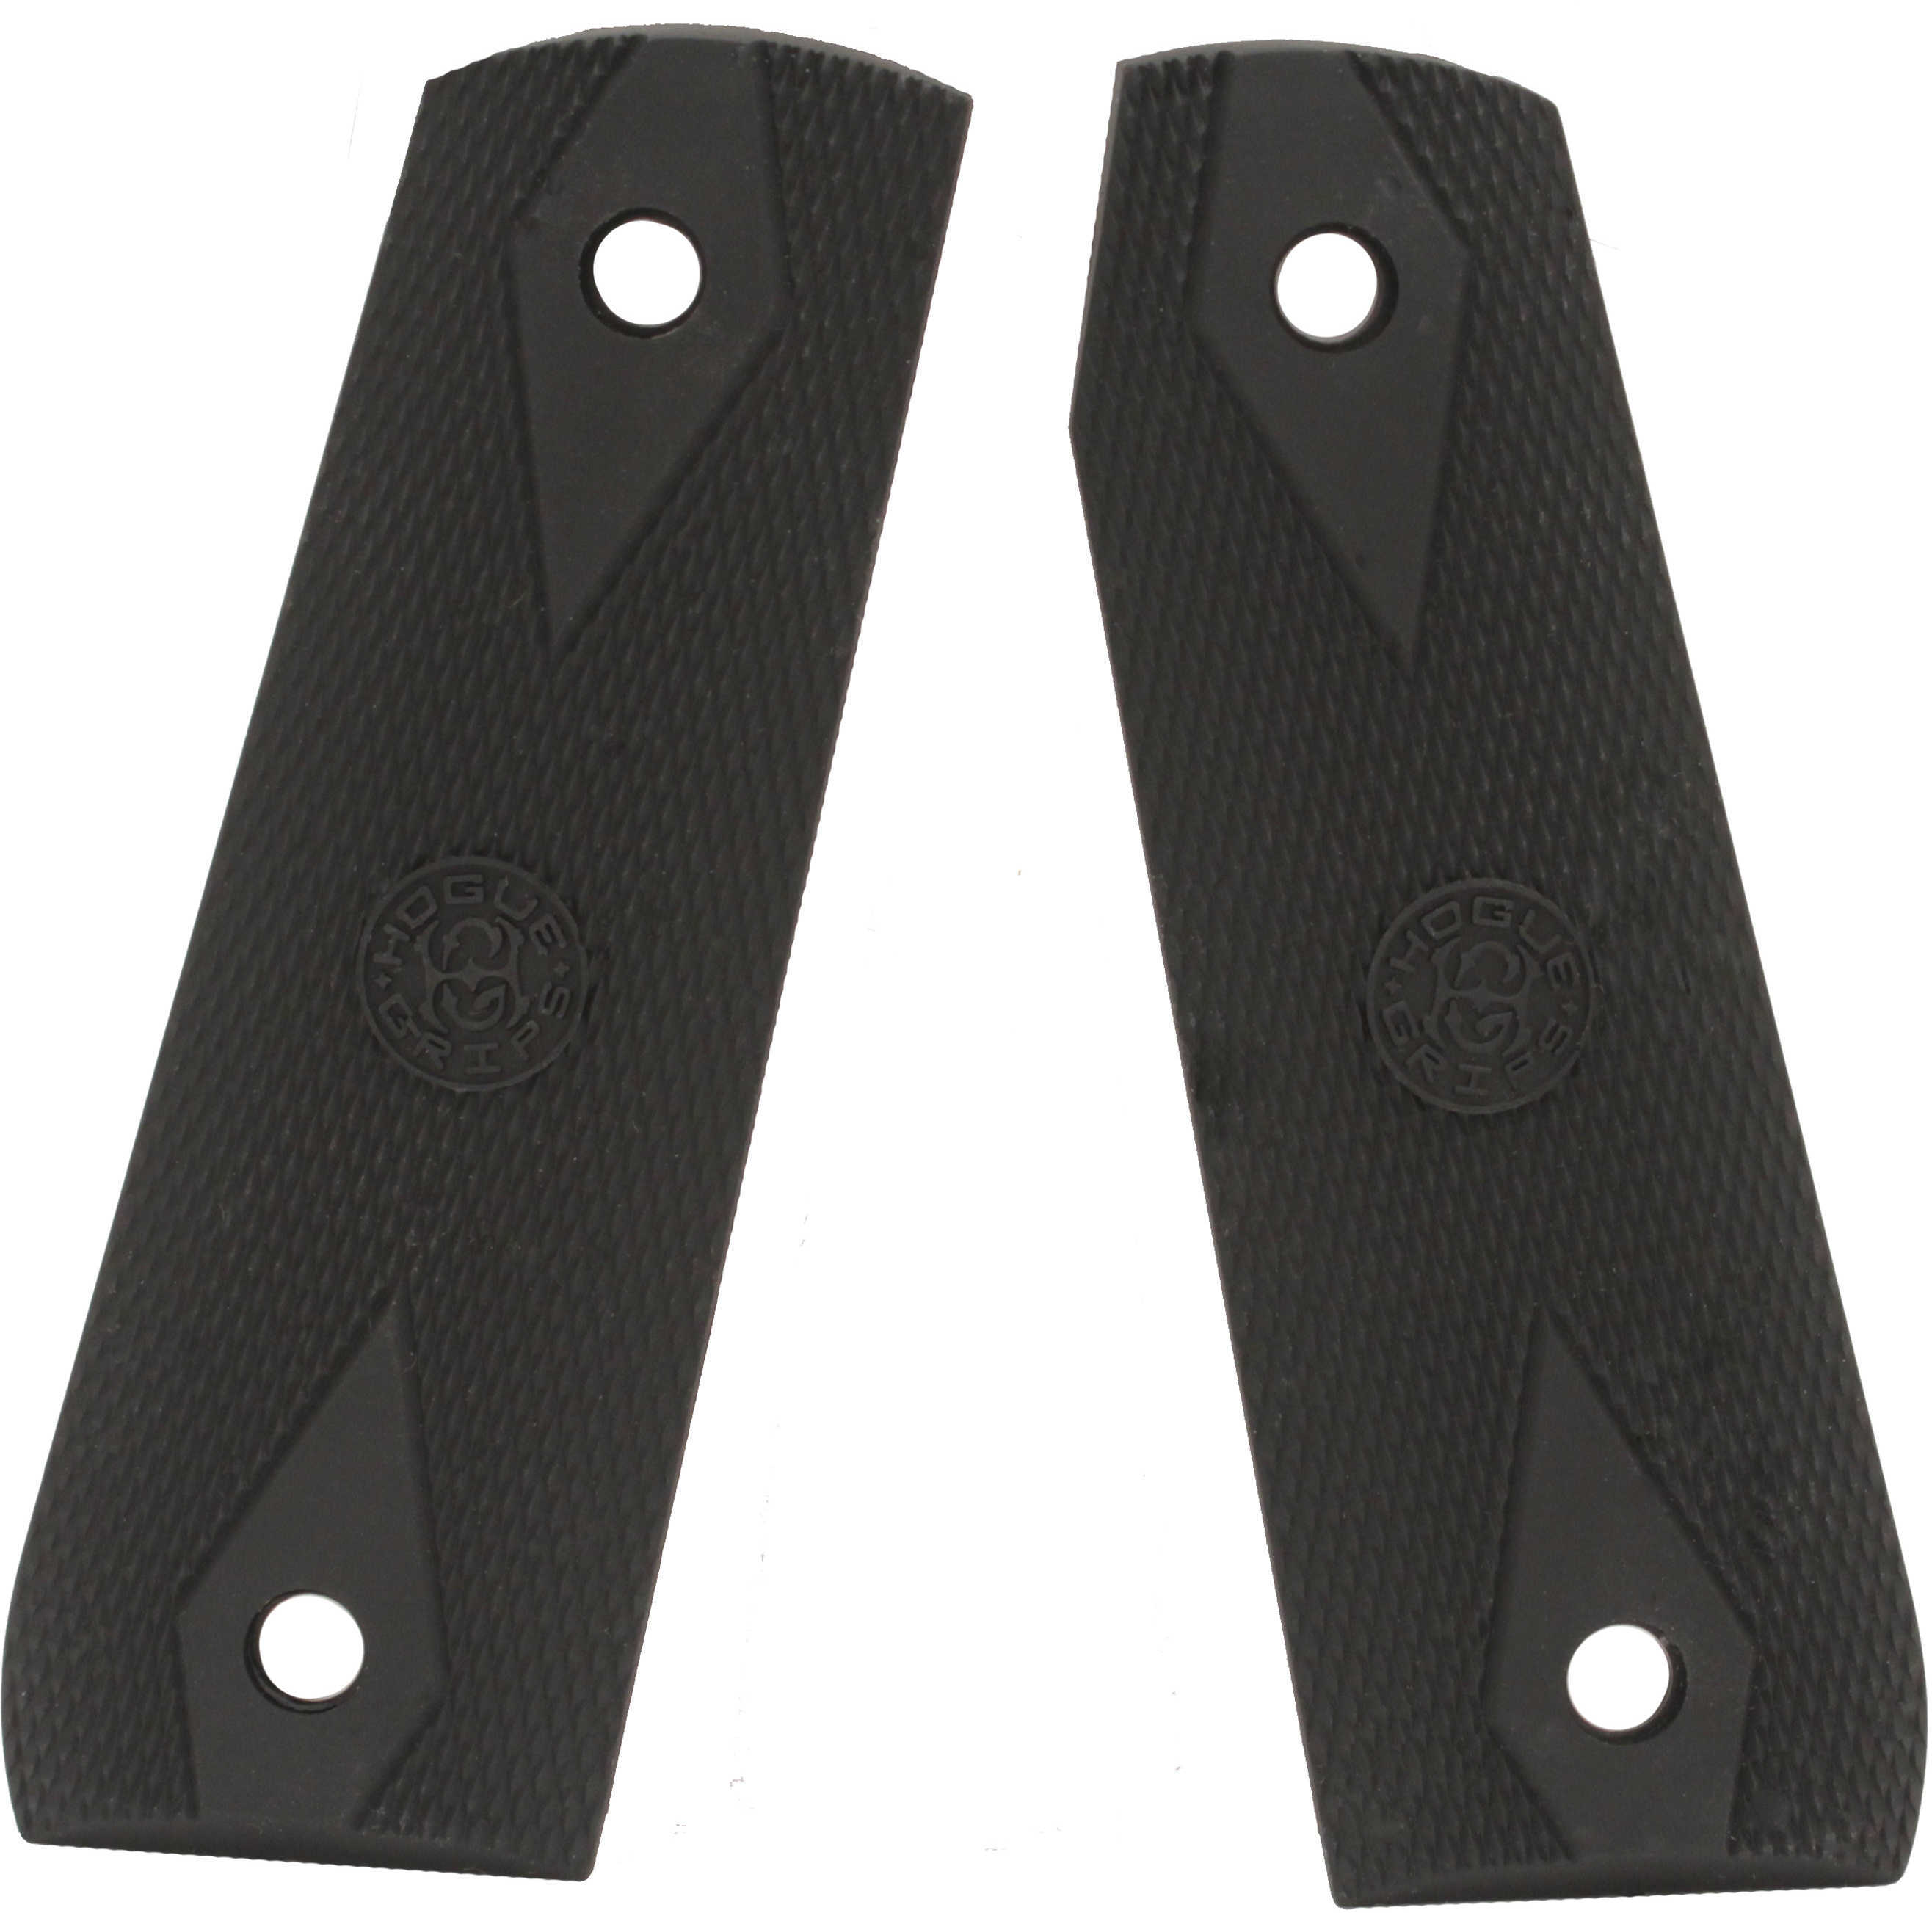 Hogue 82090 Ruger® 22/45 Rp Rubber Grip Panels Checkered W/Diamonds Black